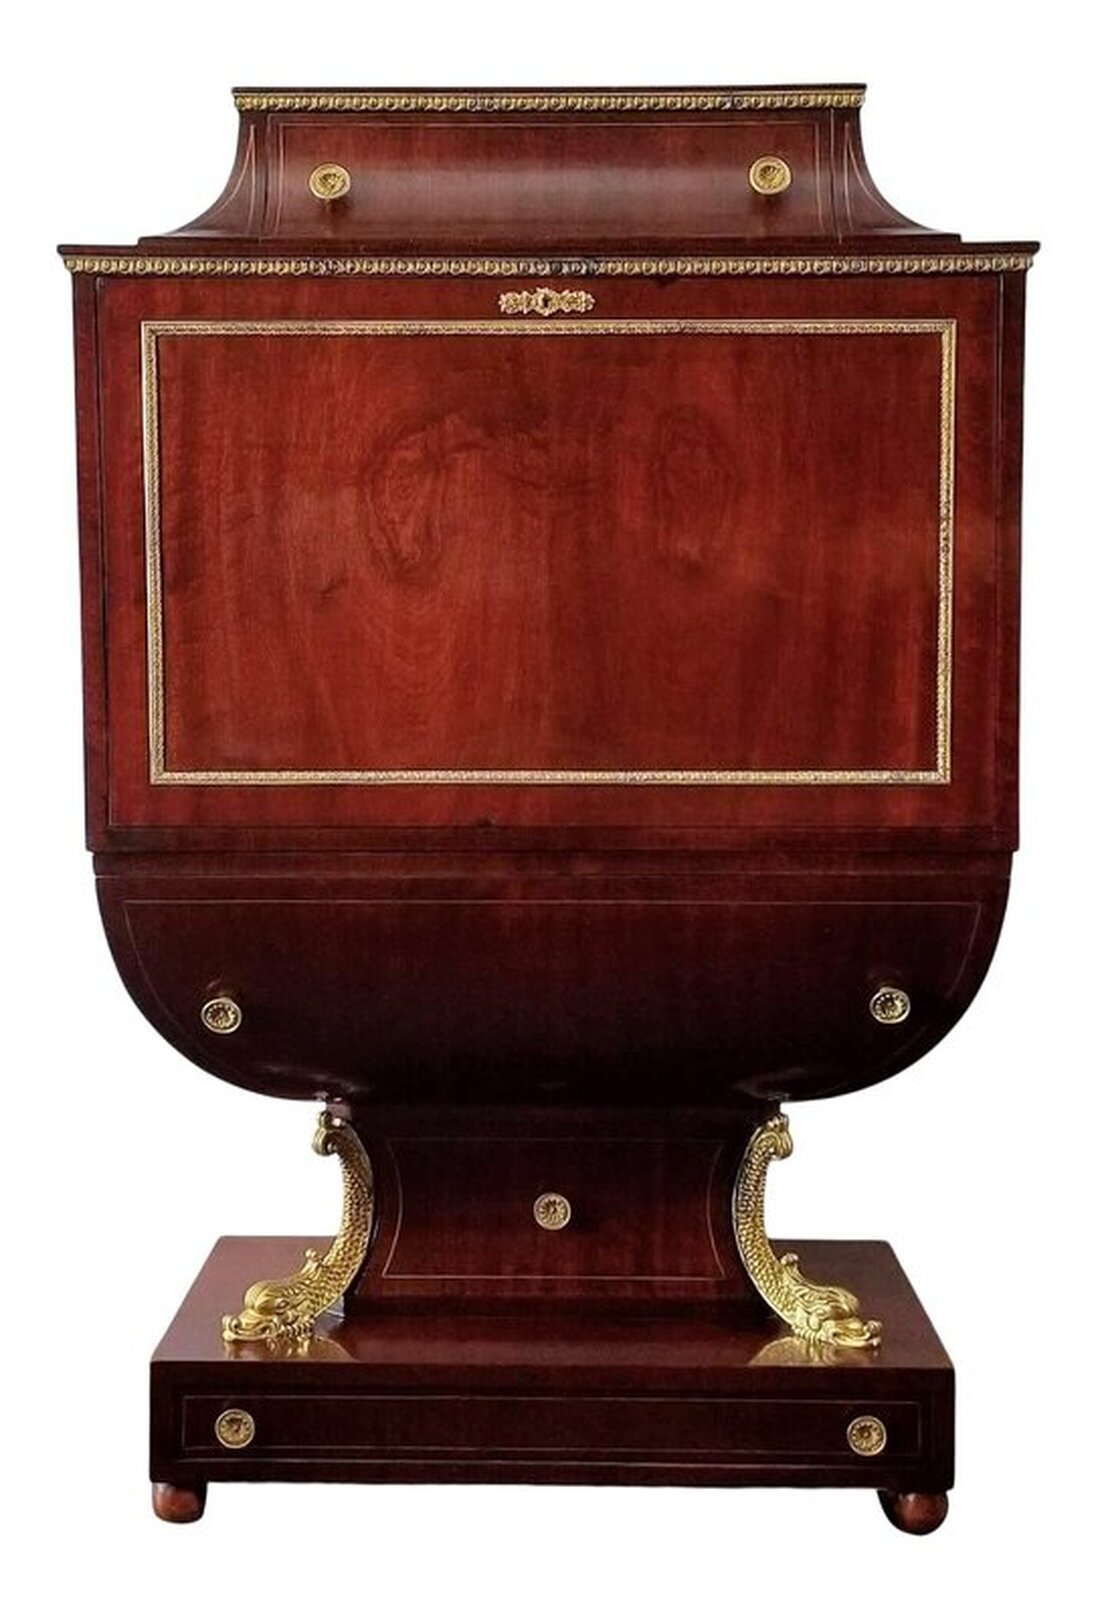 Replica of early 19th century secretary, or fall front, desk ( secrétaire à abattant ) in the French Empire / Viennese and Austrian Biedermeier style finished with mahogany veneers and chased brass mounts.  Under the chased brass trim at the top is a single drawer with two chrysanthemum chased pulls and inlaid brass banding. Brass banding is also inset to the sides of the drawer.  The drop front is located below more chased brass trim. The panel is framed with chased brass trim and there is a chased brass key scutcheon at top.  The interior is fitted with eight small storage drawers - four on either side of the central cabinet. The drawers feature inset brass banding and laurel wreath drop pulls. Below the central cabinet is one long drawer with inlaid brass banding and two laurel wreath drop pulls. The shaped door at center is framed and inlaid with brass banding. The open door reveals a hidden cocktail cabinet with one glass shelf and mirrored back. The writing and work surface of the drop front panel is inset with embossed gold decoration on green leather.  The possum belly drawer below the drop panel is edged with inset brass banding and has two chrysanthemum chased brass pulls.  The base has one shaped drawer with a chrysanthemum chased brass pull and inlaid brass banding. On each side of this drawer are gilt dolphins.  At the bottom, above the bun feet, is one long drawer with two chrysanthemum chased pulls and inlaid brass banding.